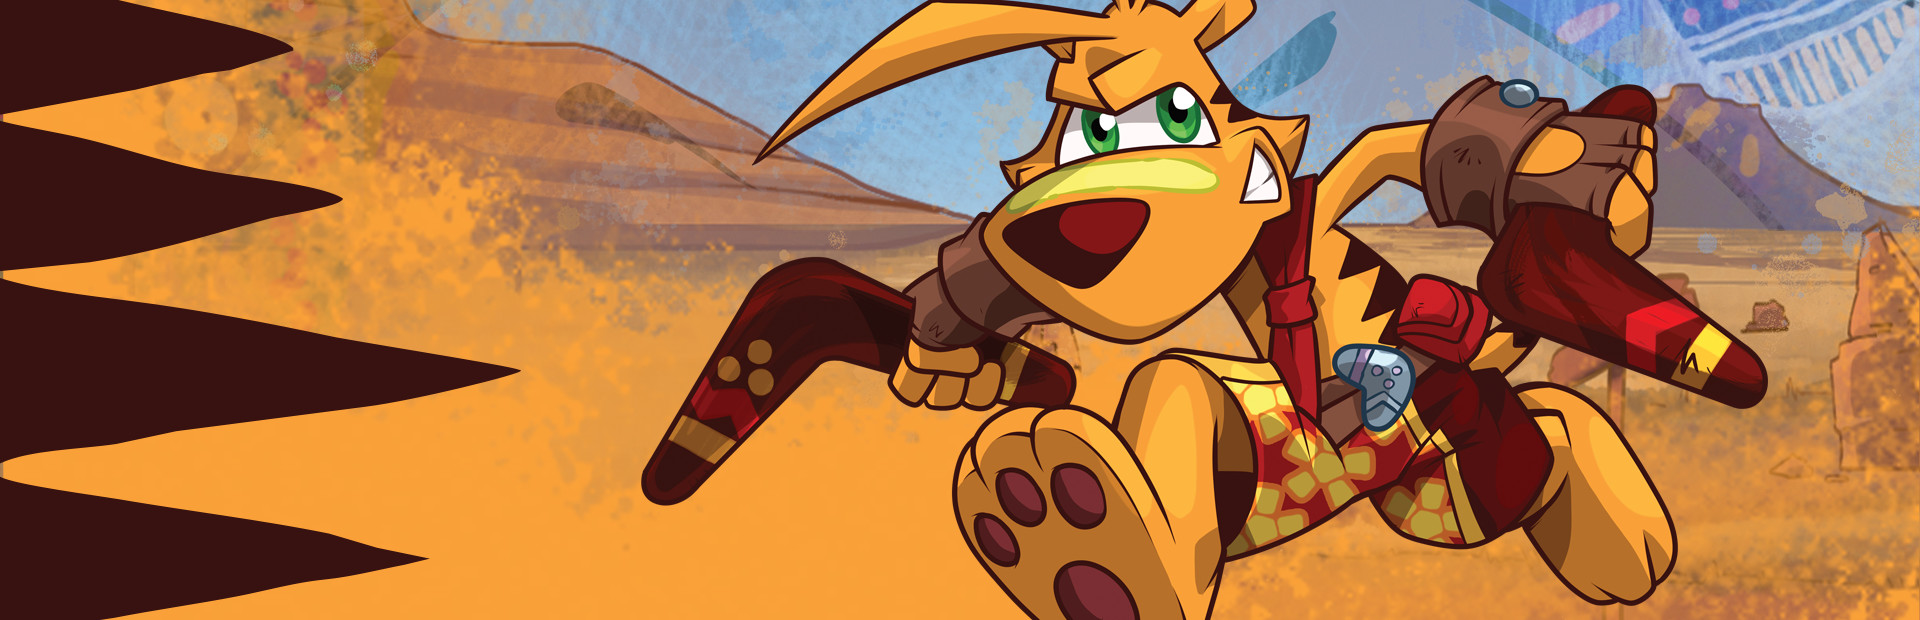 TY the Tasmanian Tiger 4 cover image